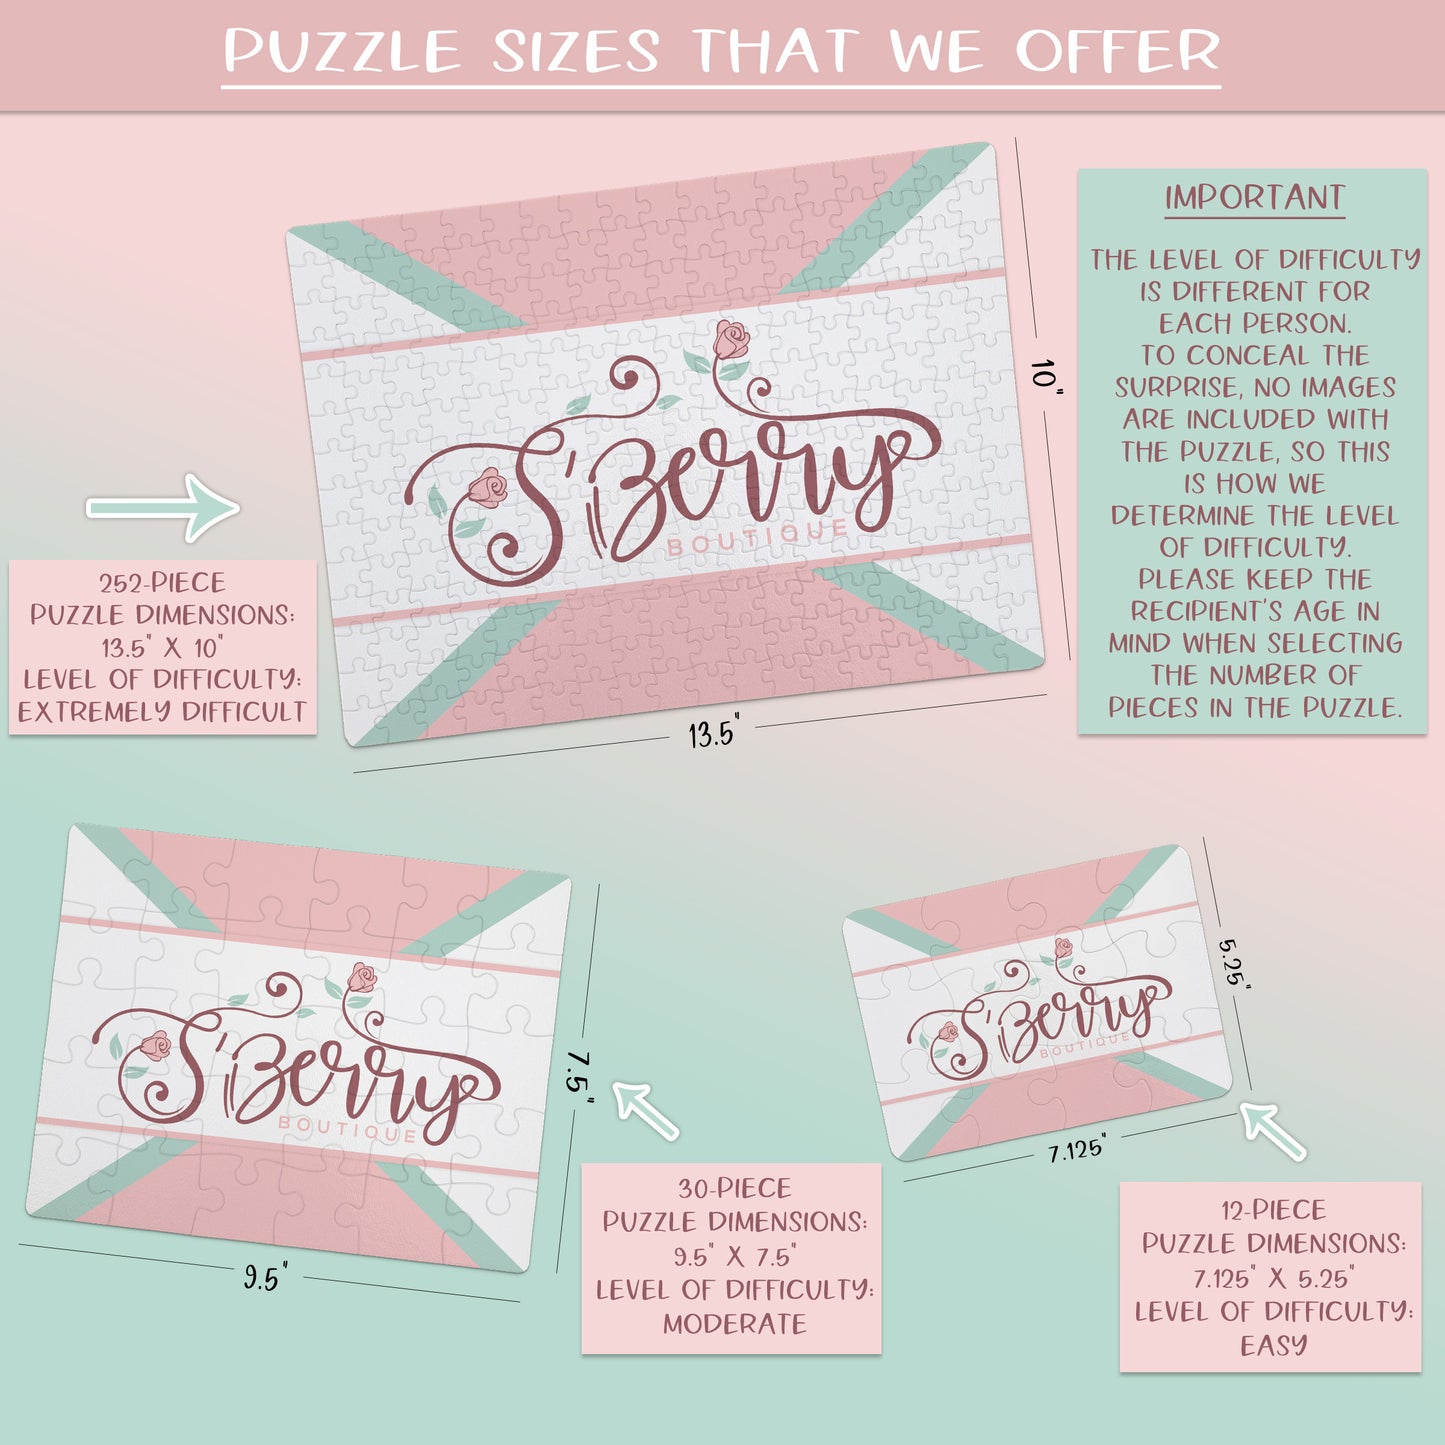 Create Your Own Puzzle - Arrow Design - CYOP0229 | S'Berry Boutique